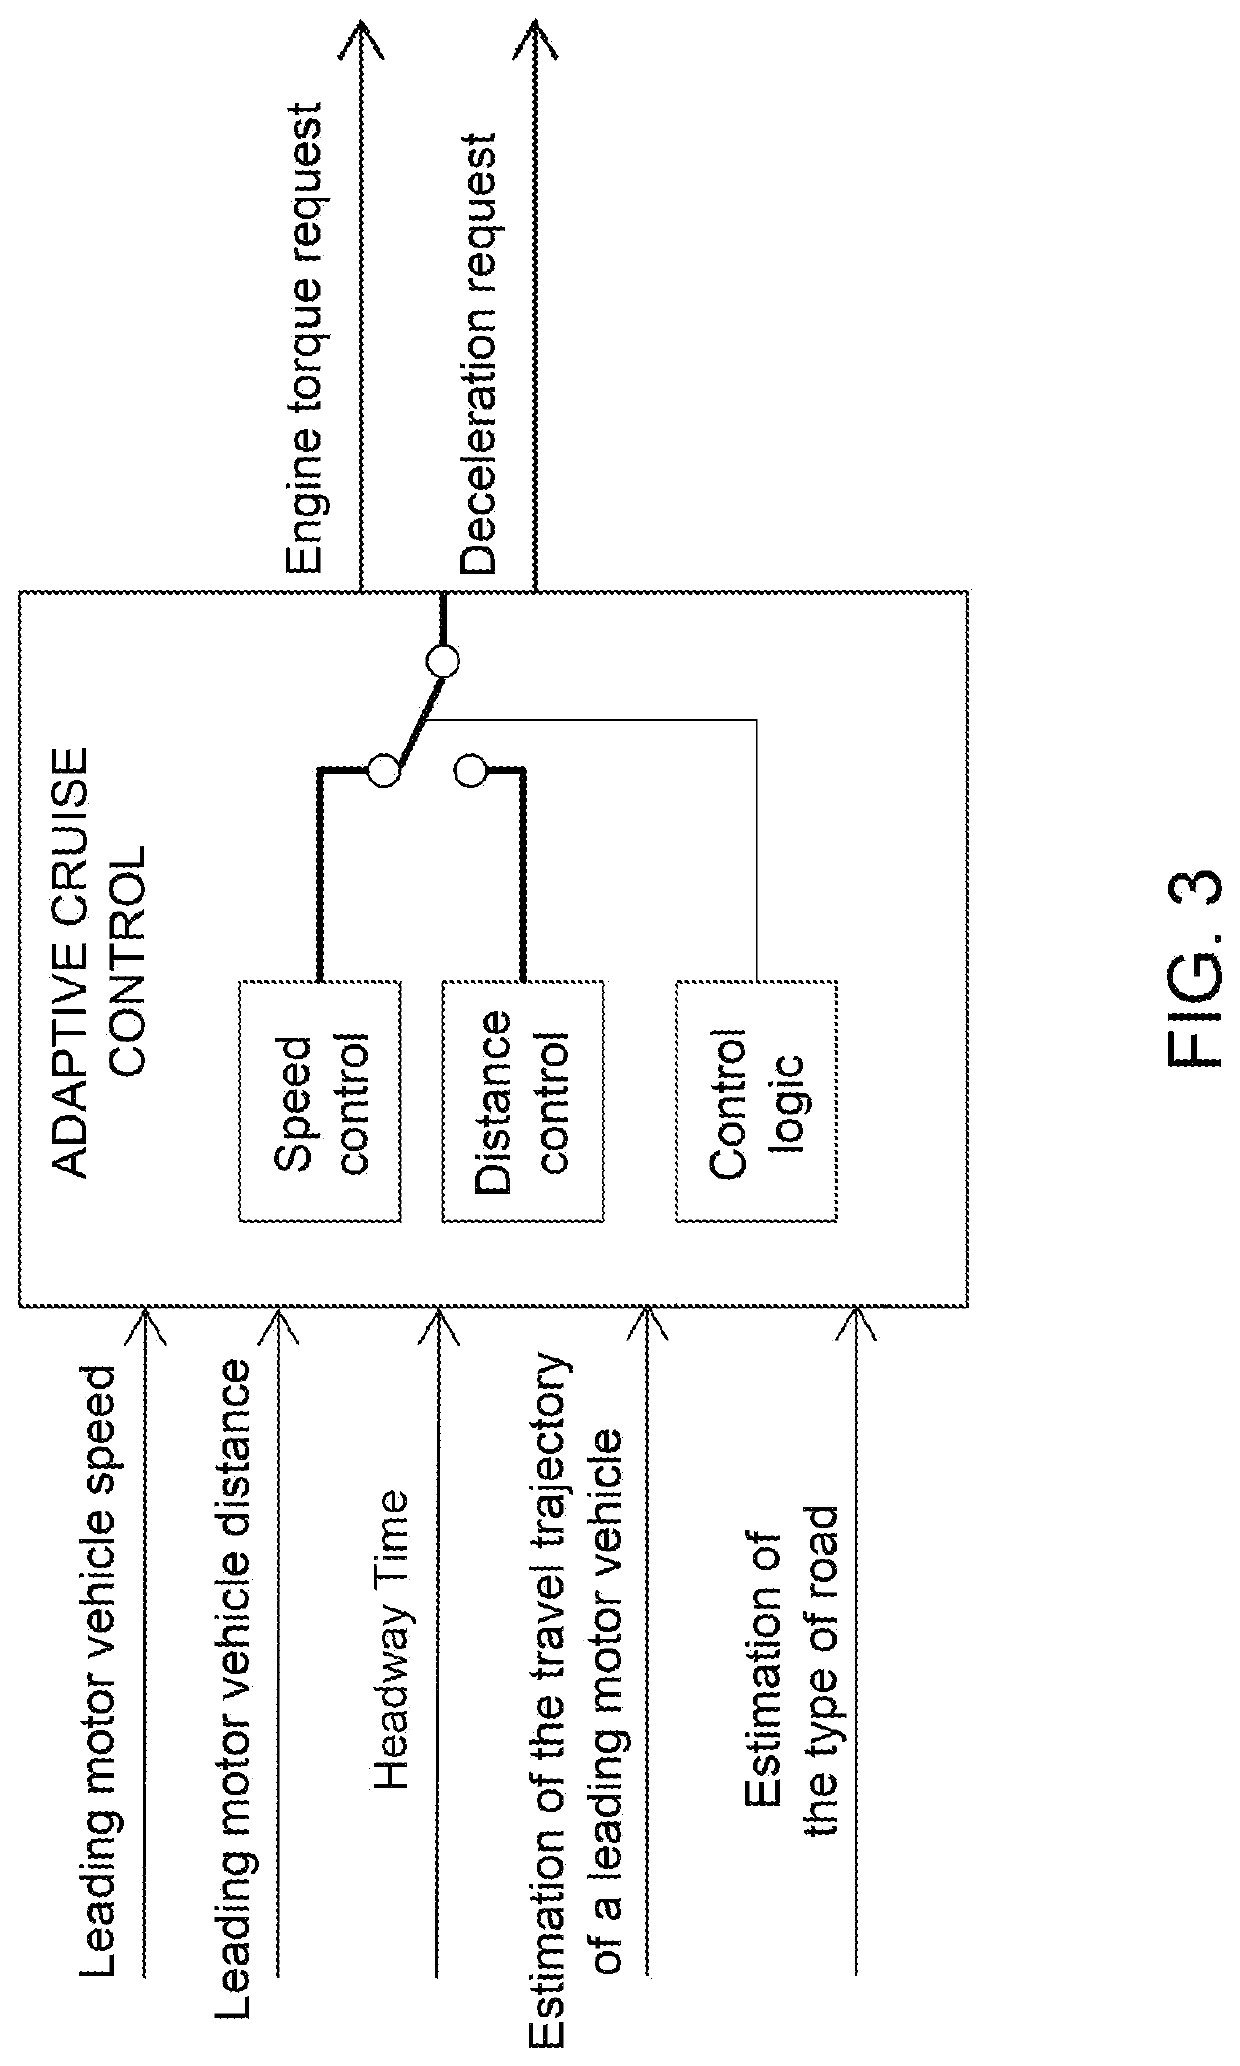 Adjusting the longitudinal motion control of a host motor vehicle based on the estimation of the travel trajectory of a leading motor vehicle